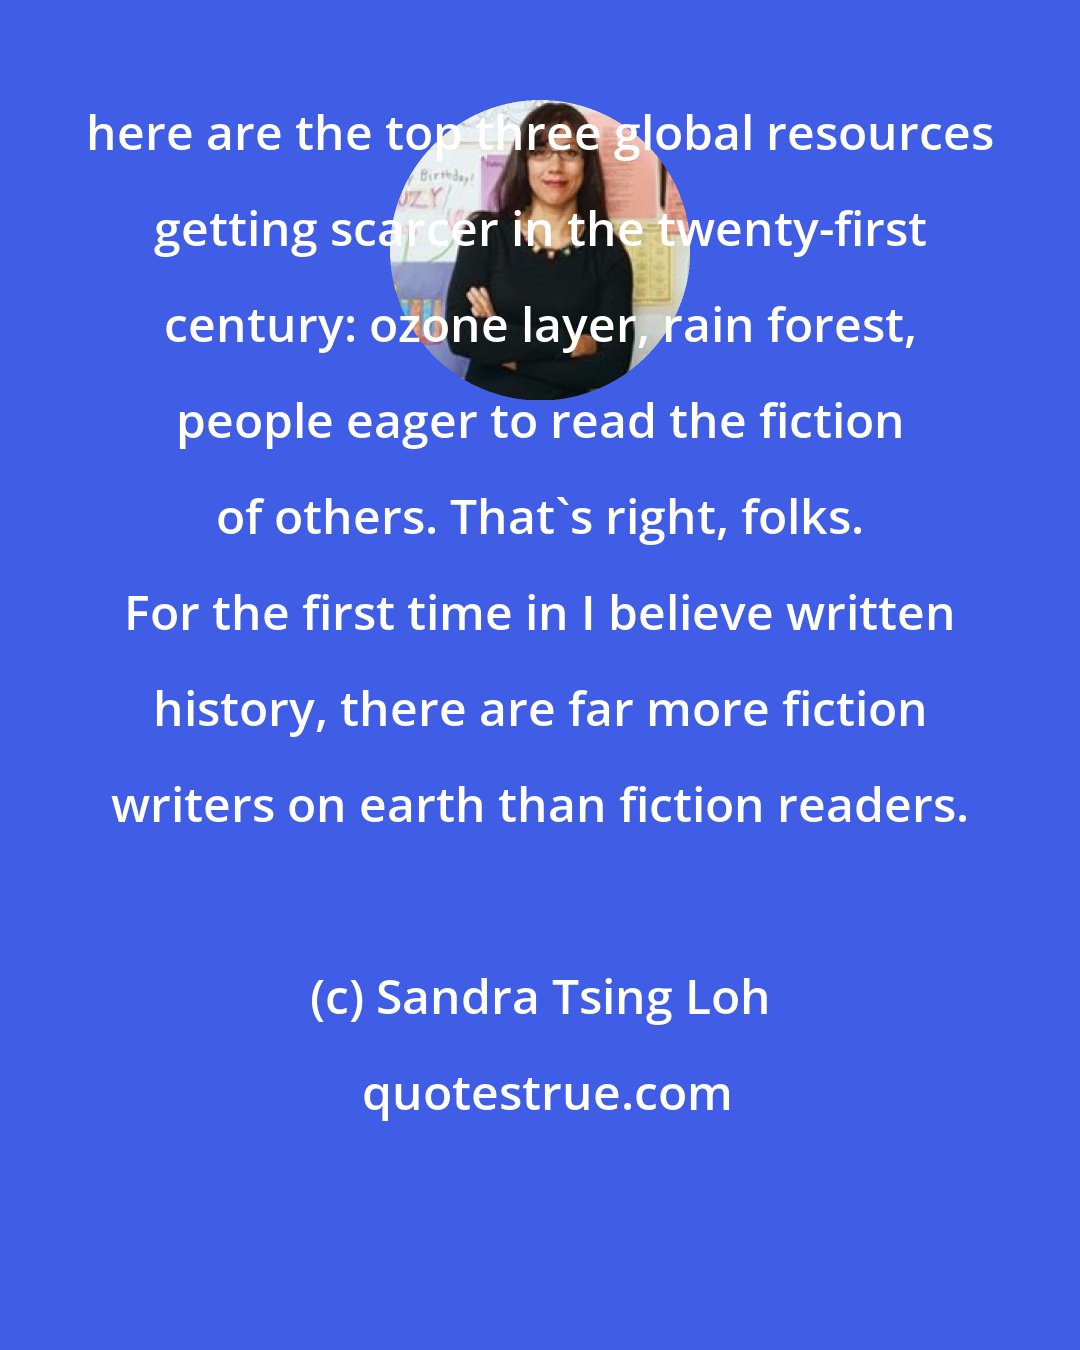 Sandra Tsing Loh: here are the top three global resources getting scarcer in the twenty-first century: ozone layer, rain forest, people eager to read the fiction of others. That's right, folks. For the first time in I believe written history, there are far more fiction writers on earth than fiction readers.